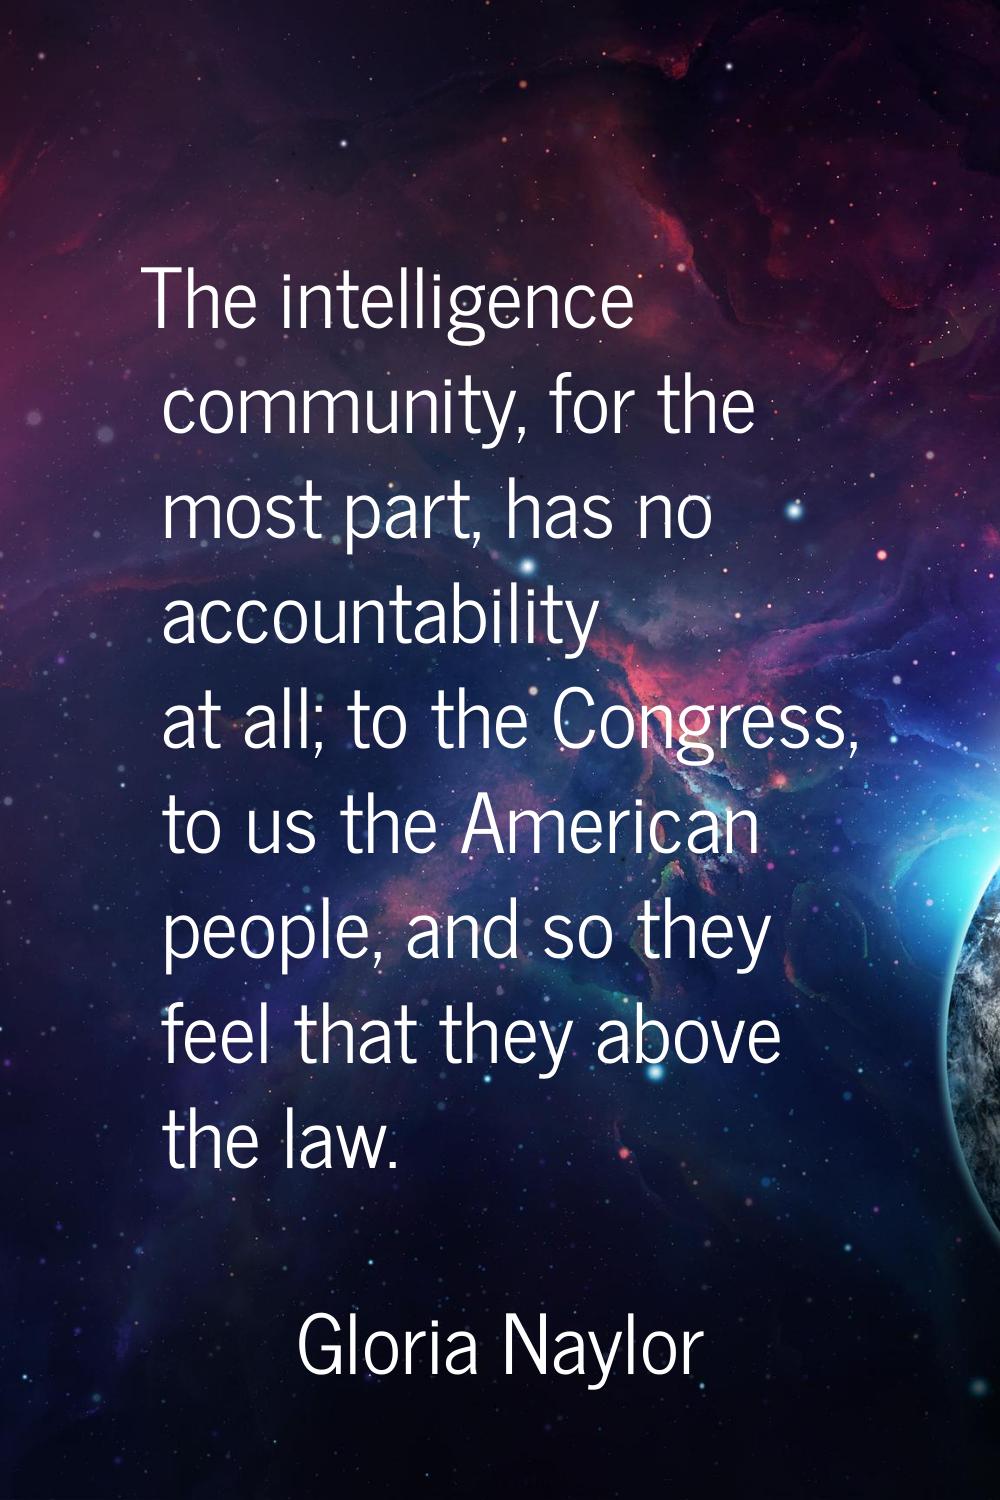 The intelligence community, for the most part, has no accountability at all; to the Congress, to us